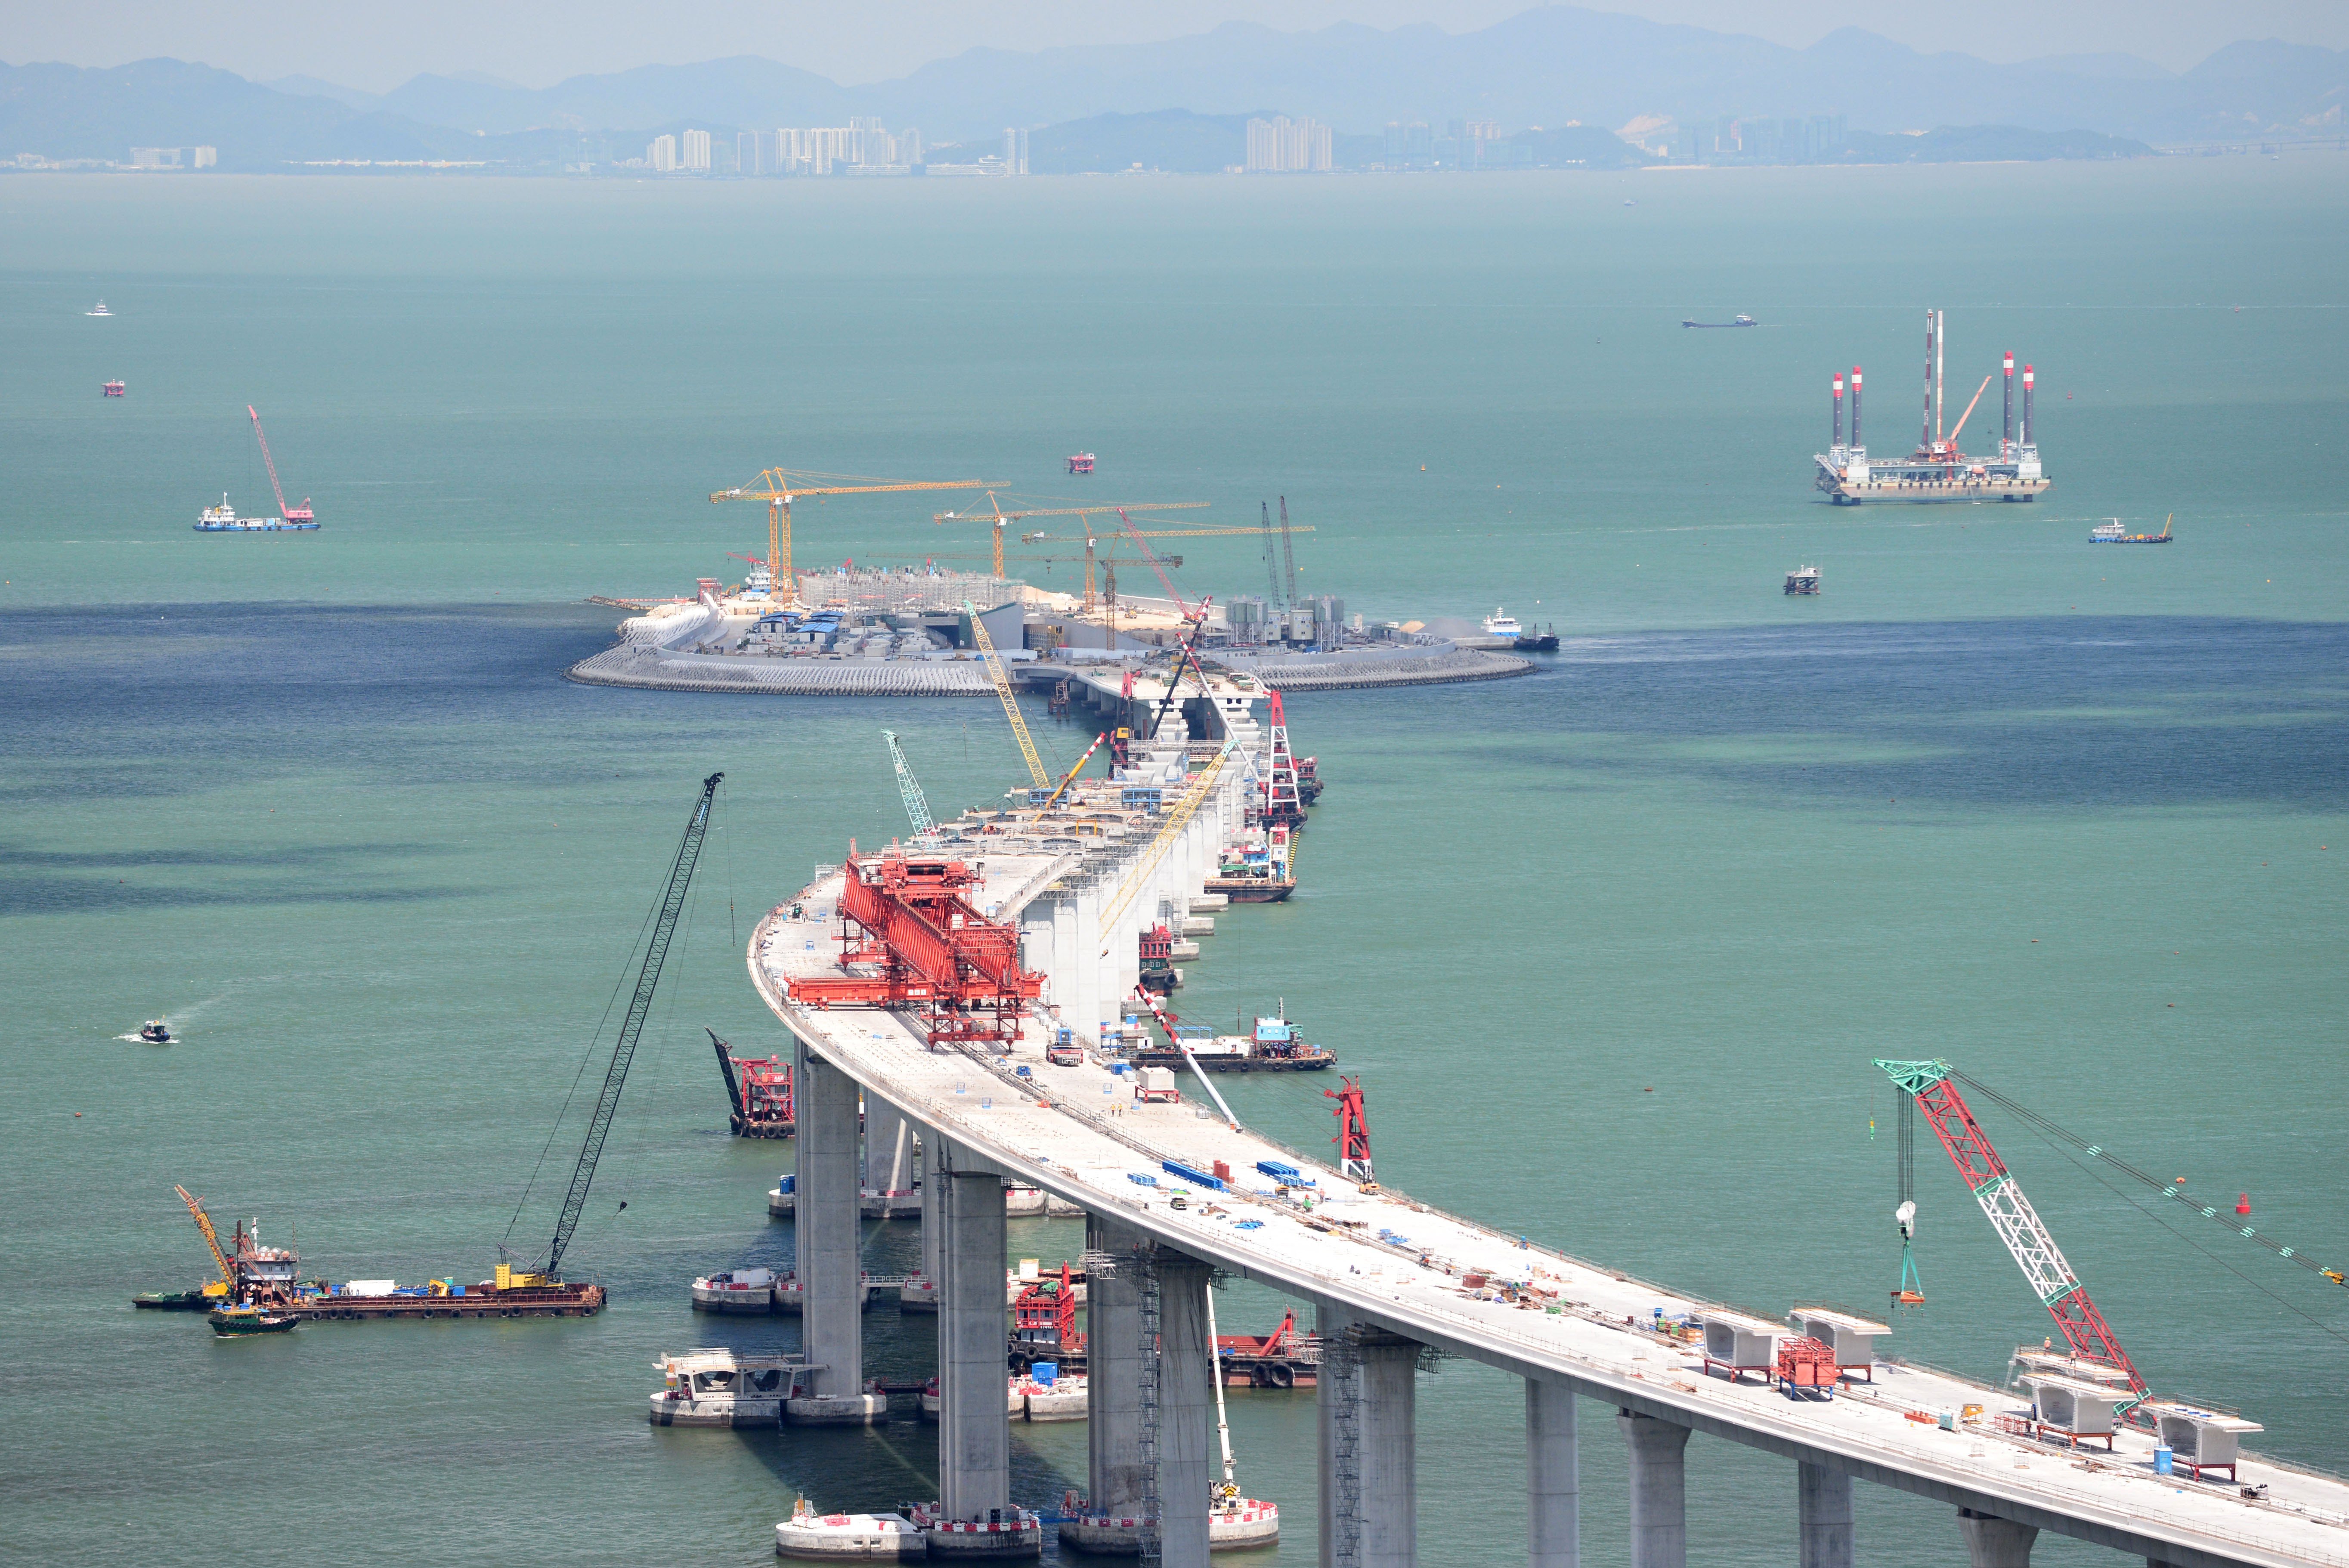 The Hong Kong-Zhuhai-Macau bridge, then still under construction in the waters off Lantau Island, in July 2017. The bridge, which passes through the habitat of the Chinese white dolphin, will be opened to traffic later this year. Photo: Xinhua